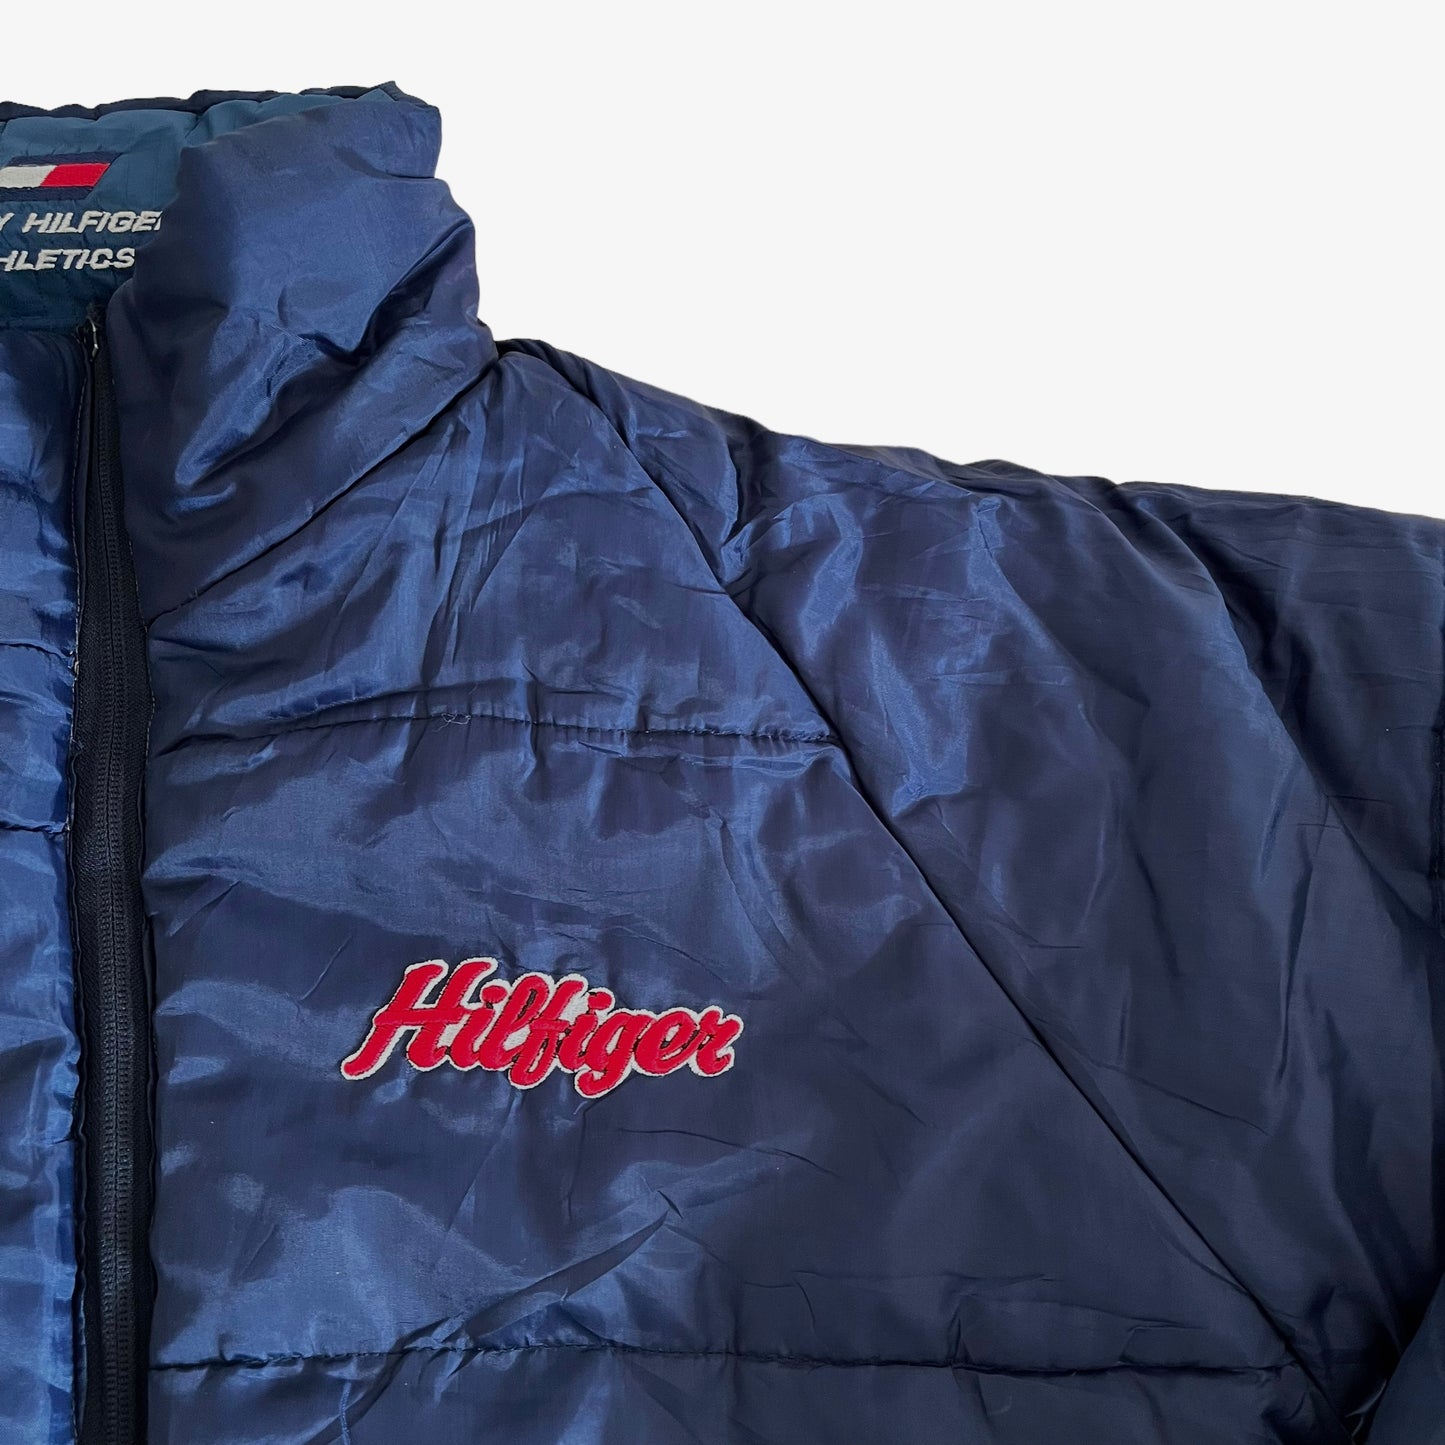 Vintage 90s Tommy Hilfiger Athletics Reversible Spell Out Puffer Jacket Reverse Logo - Casspios Dream